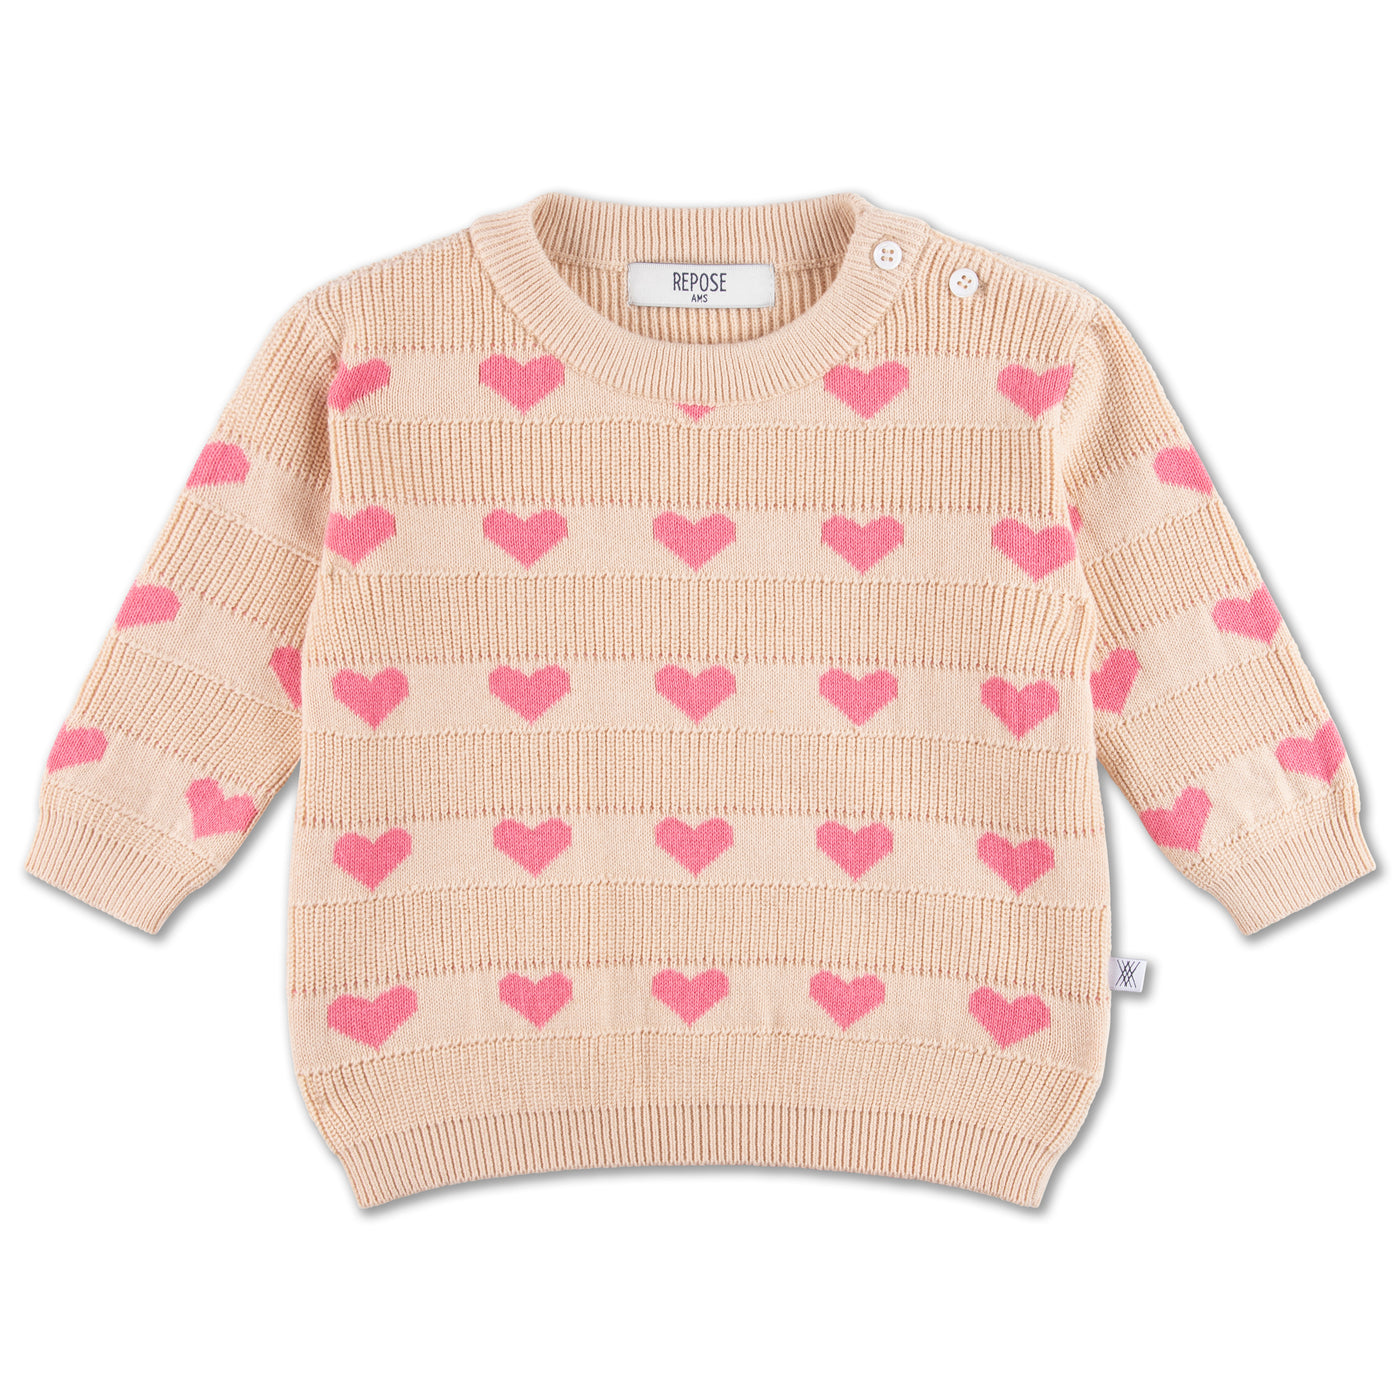 knit sweater - soft pink hearts